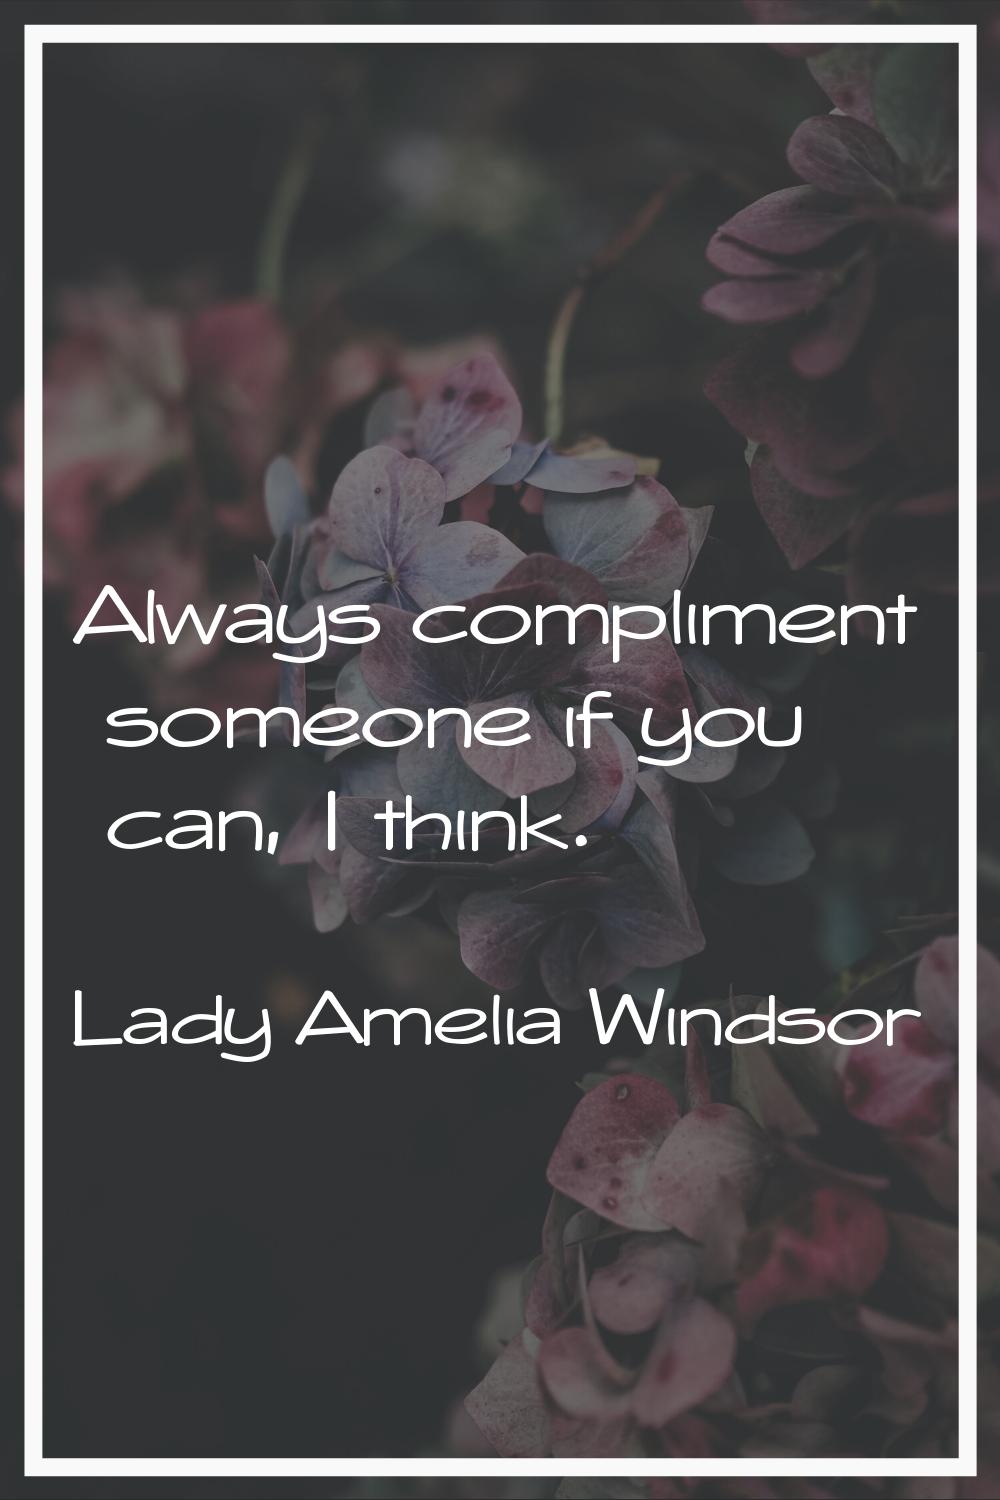 Always compliment someone if you can, I think.